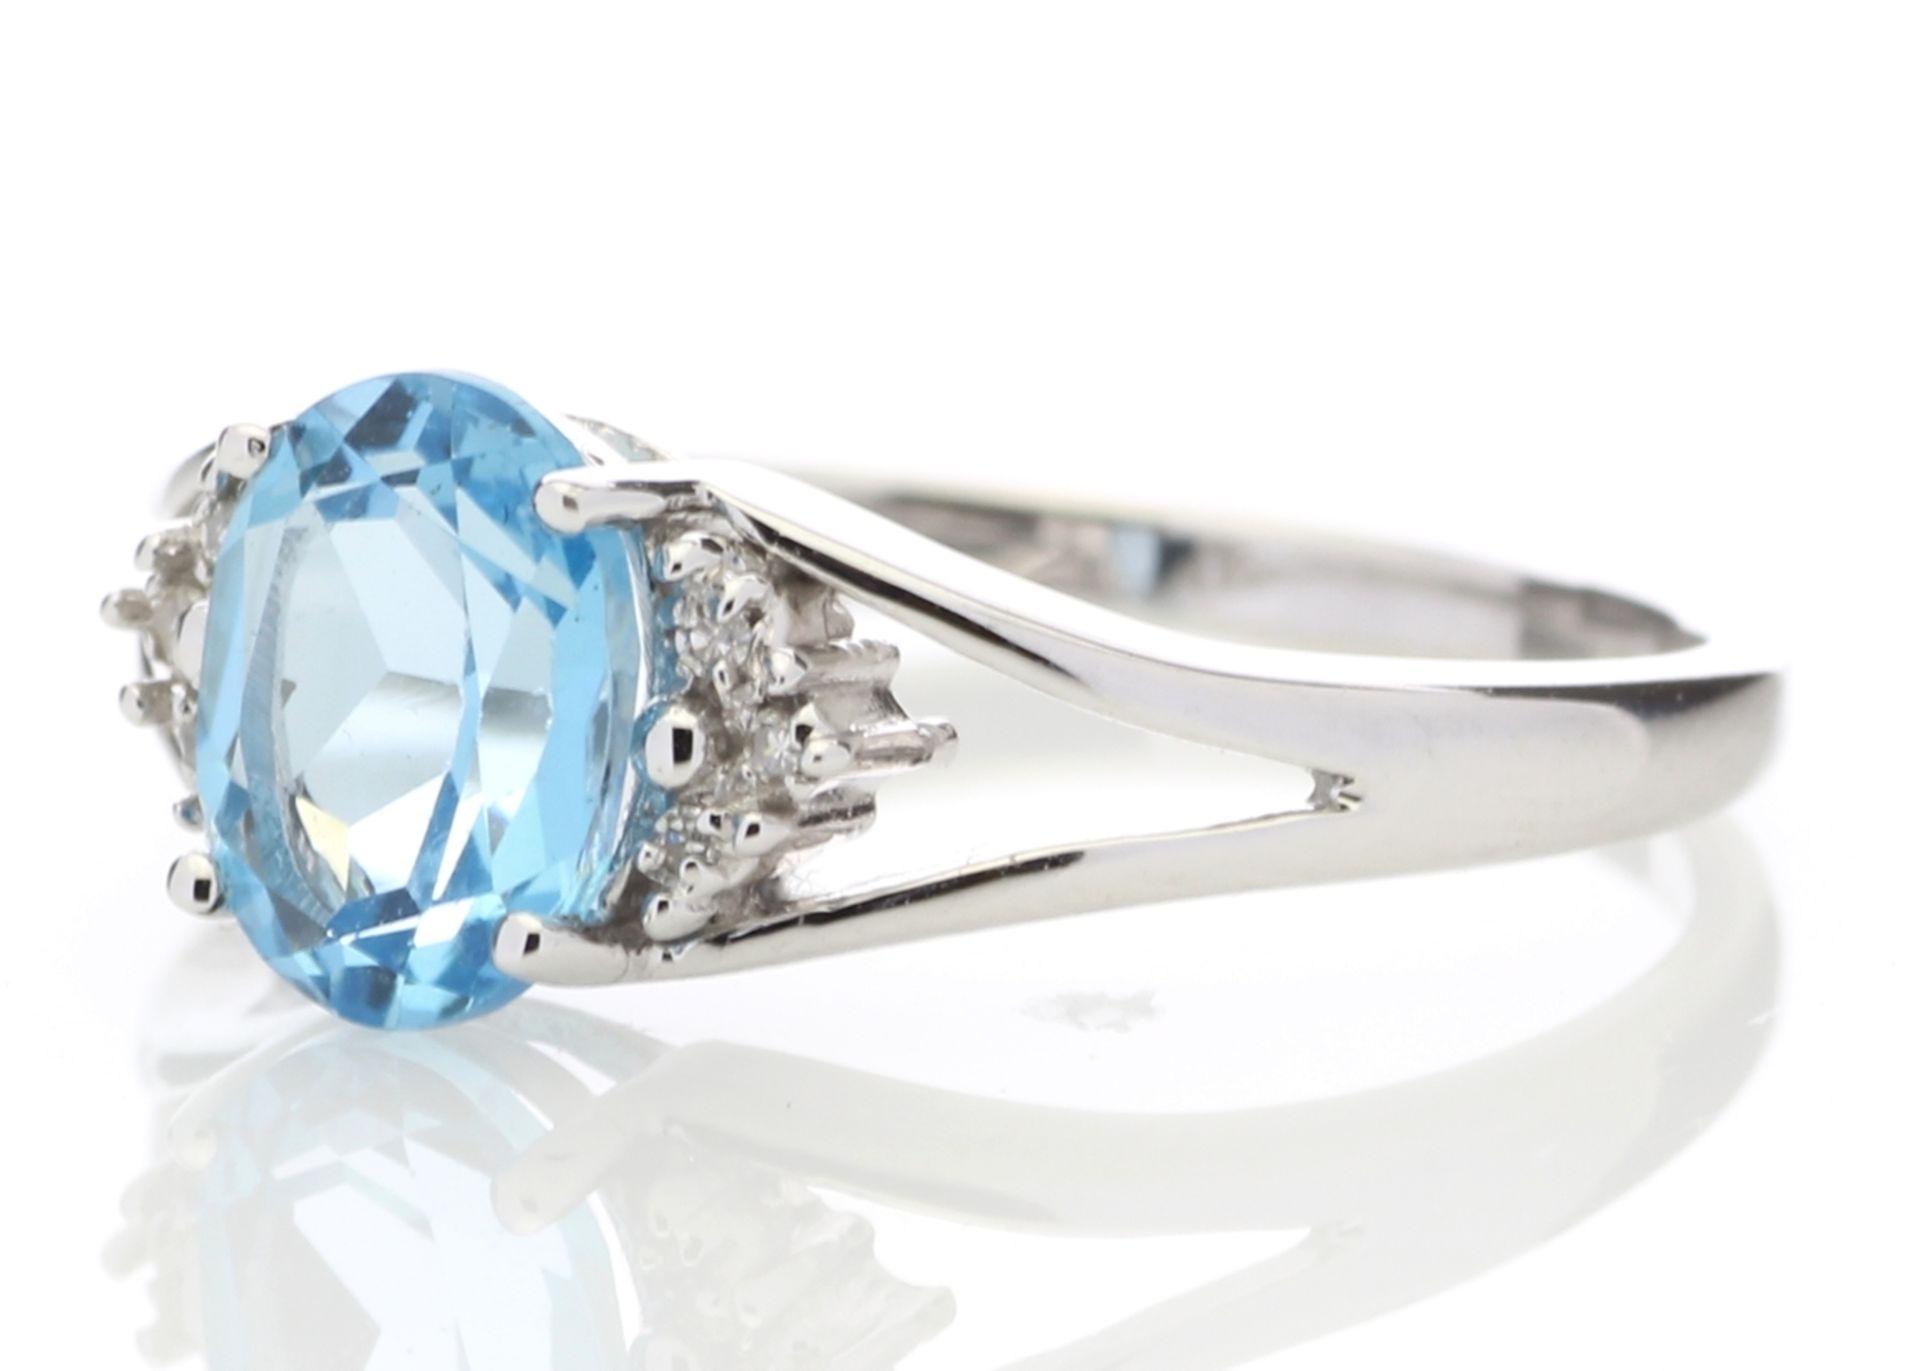 9ct White Gold Diamond And Blue Topaz Ring 0.02 - Image 2 of 6